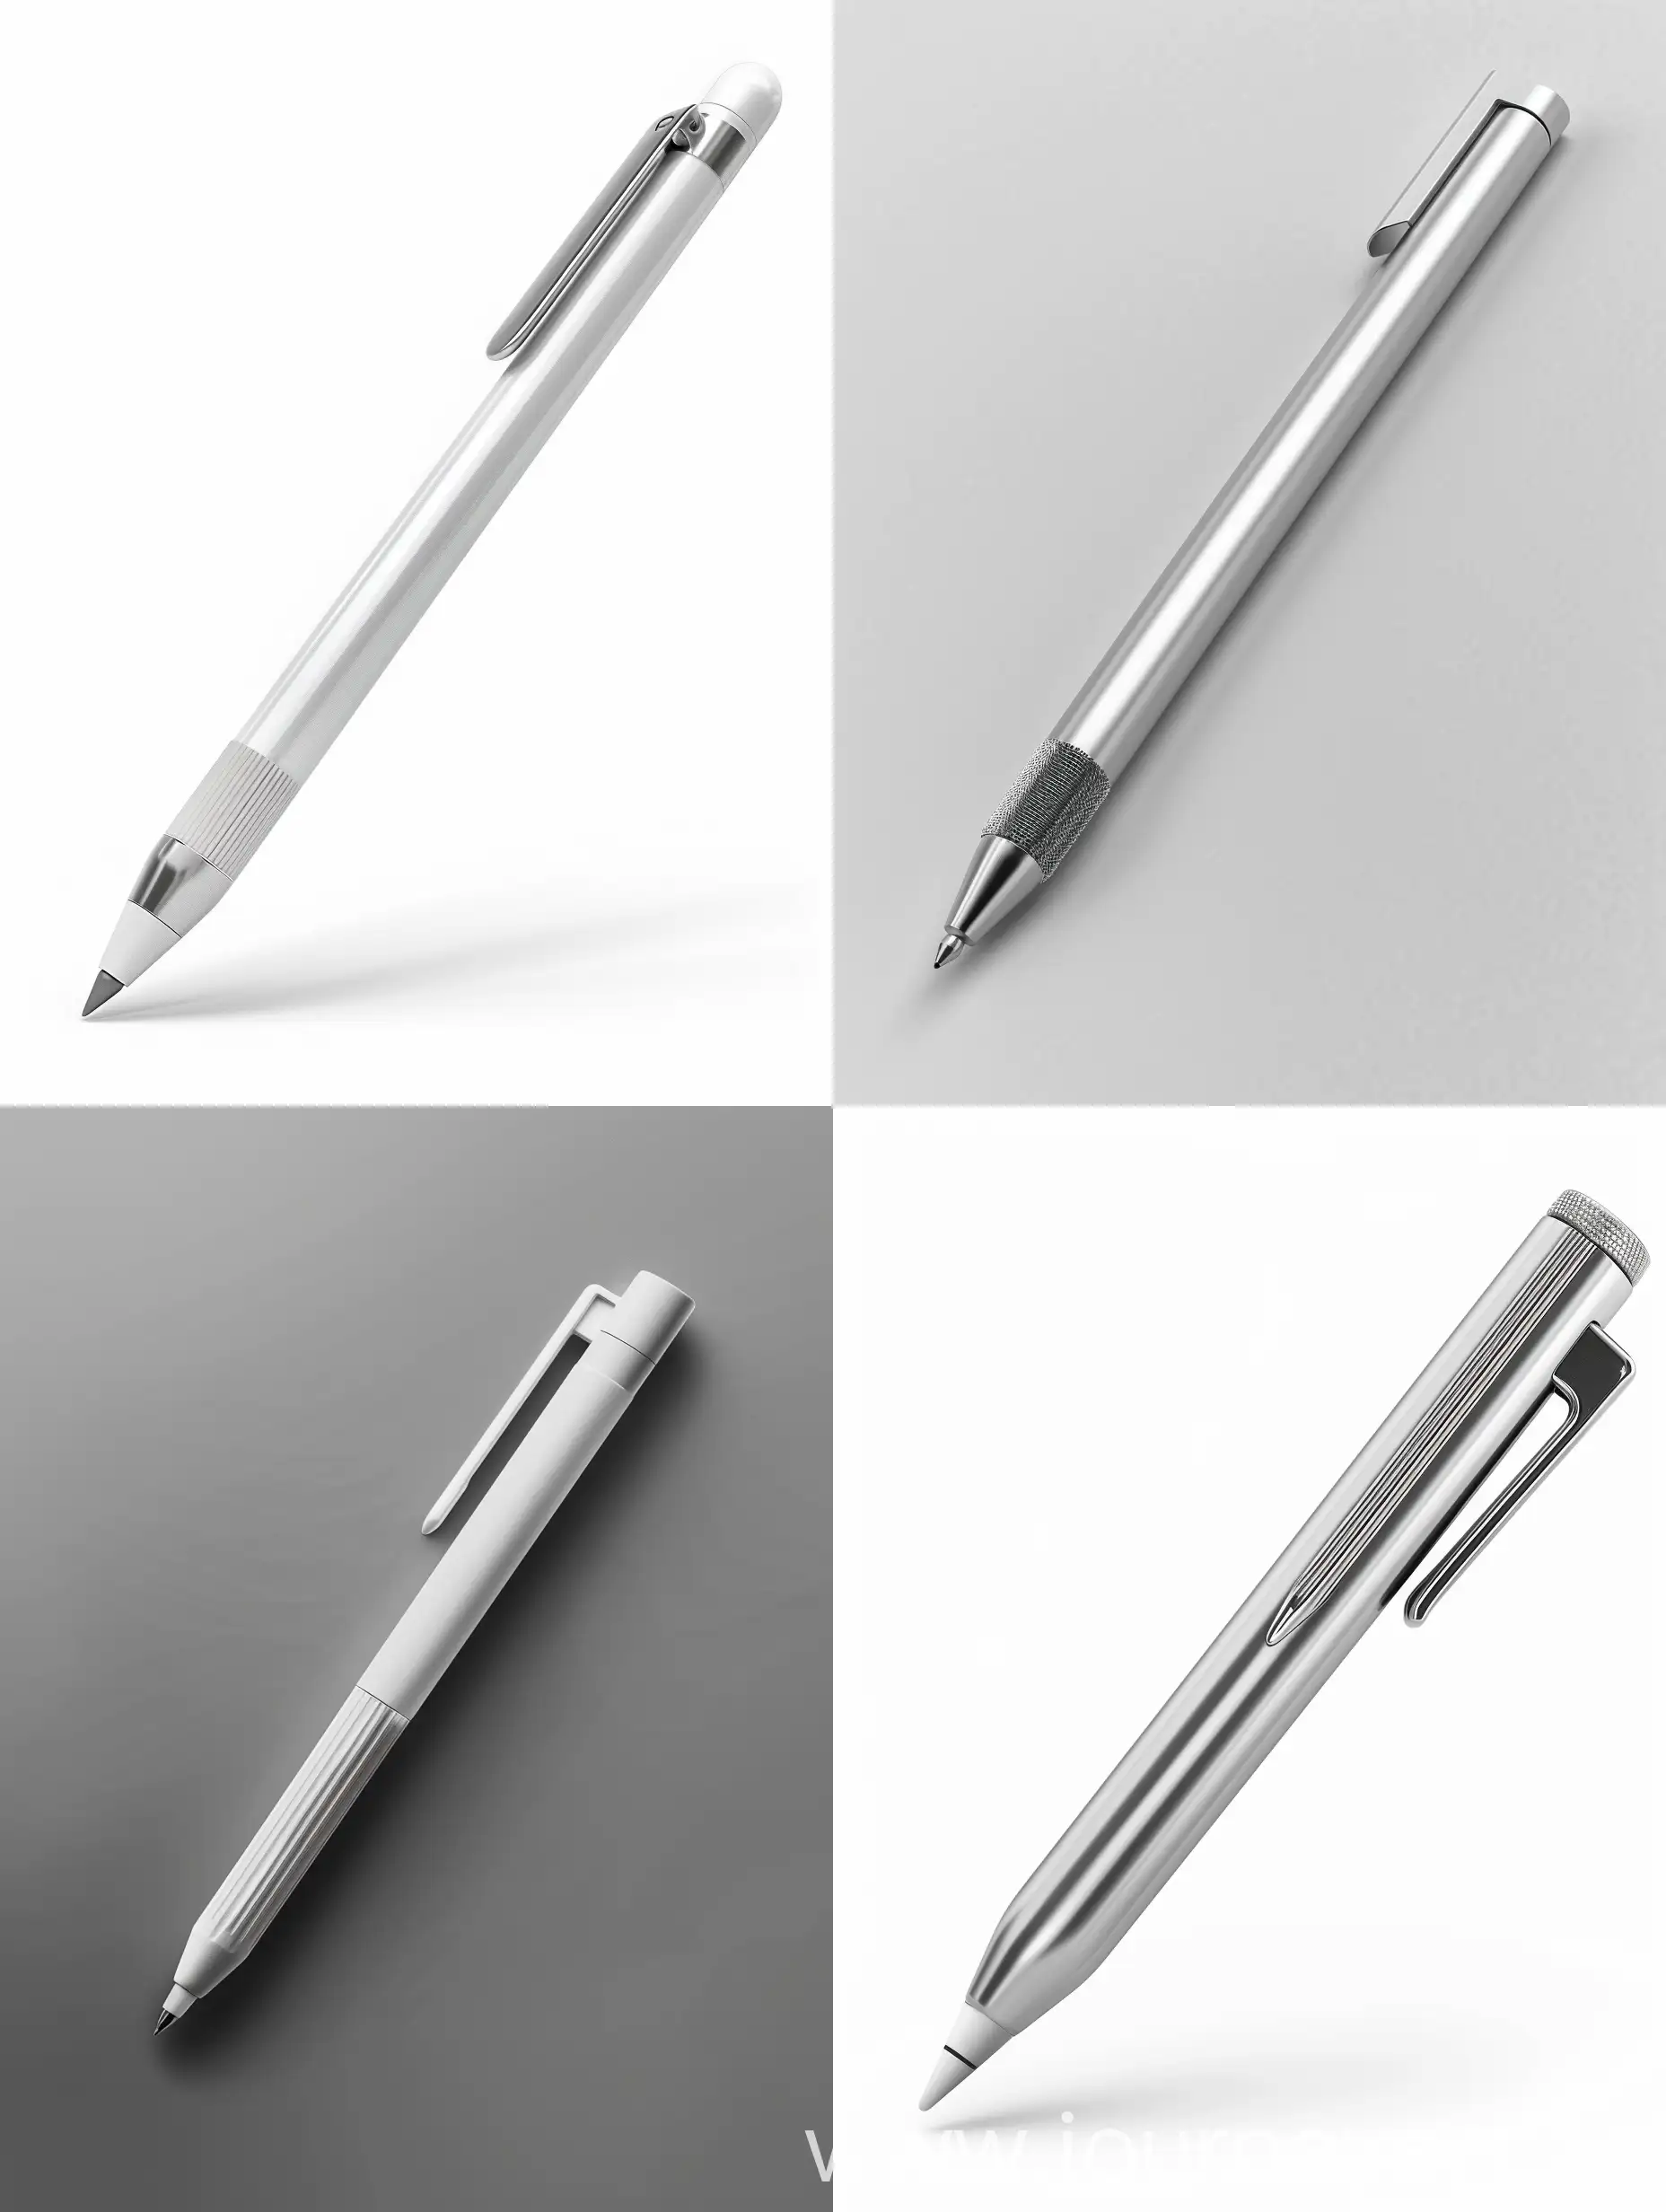 Minimalist-Design-Stylus-Pen-for-iPad-in-Front-View